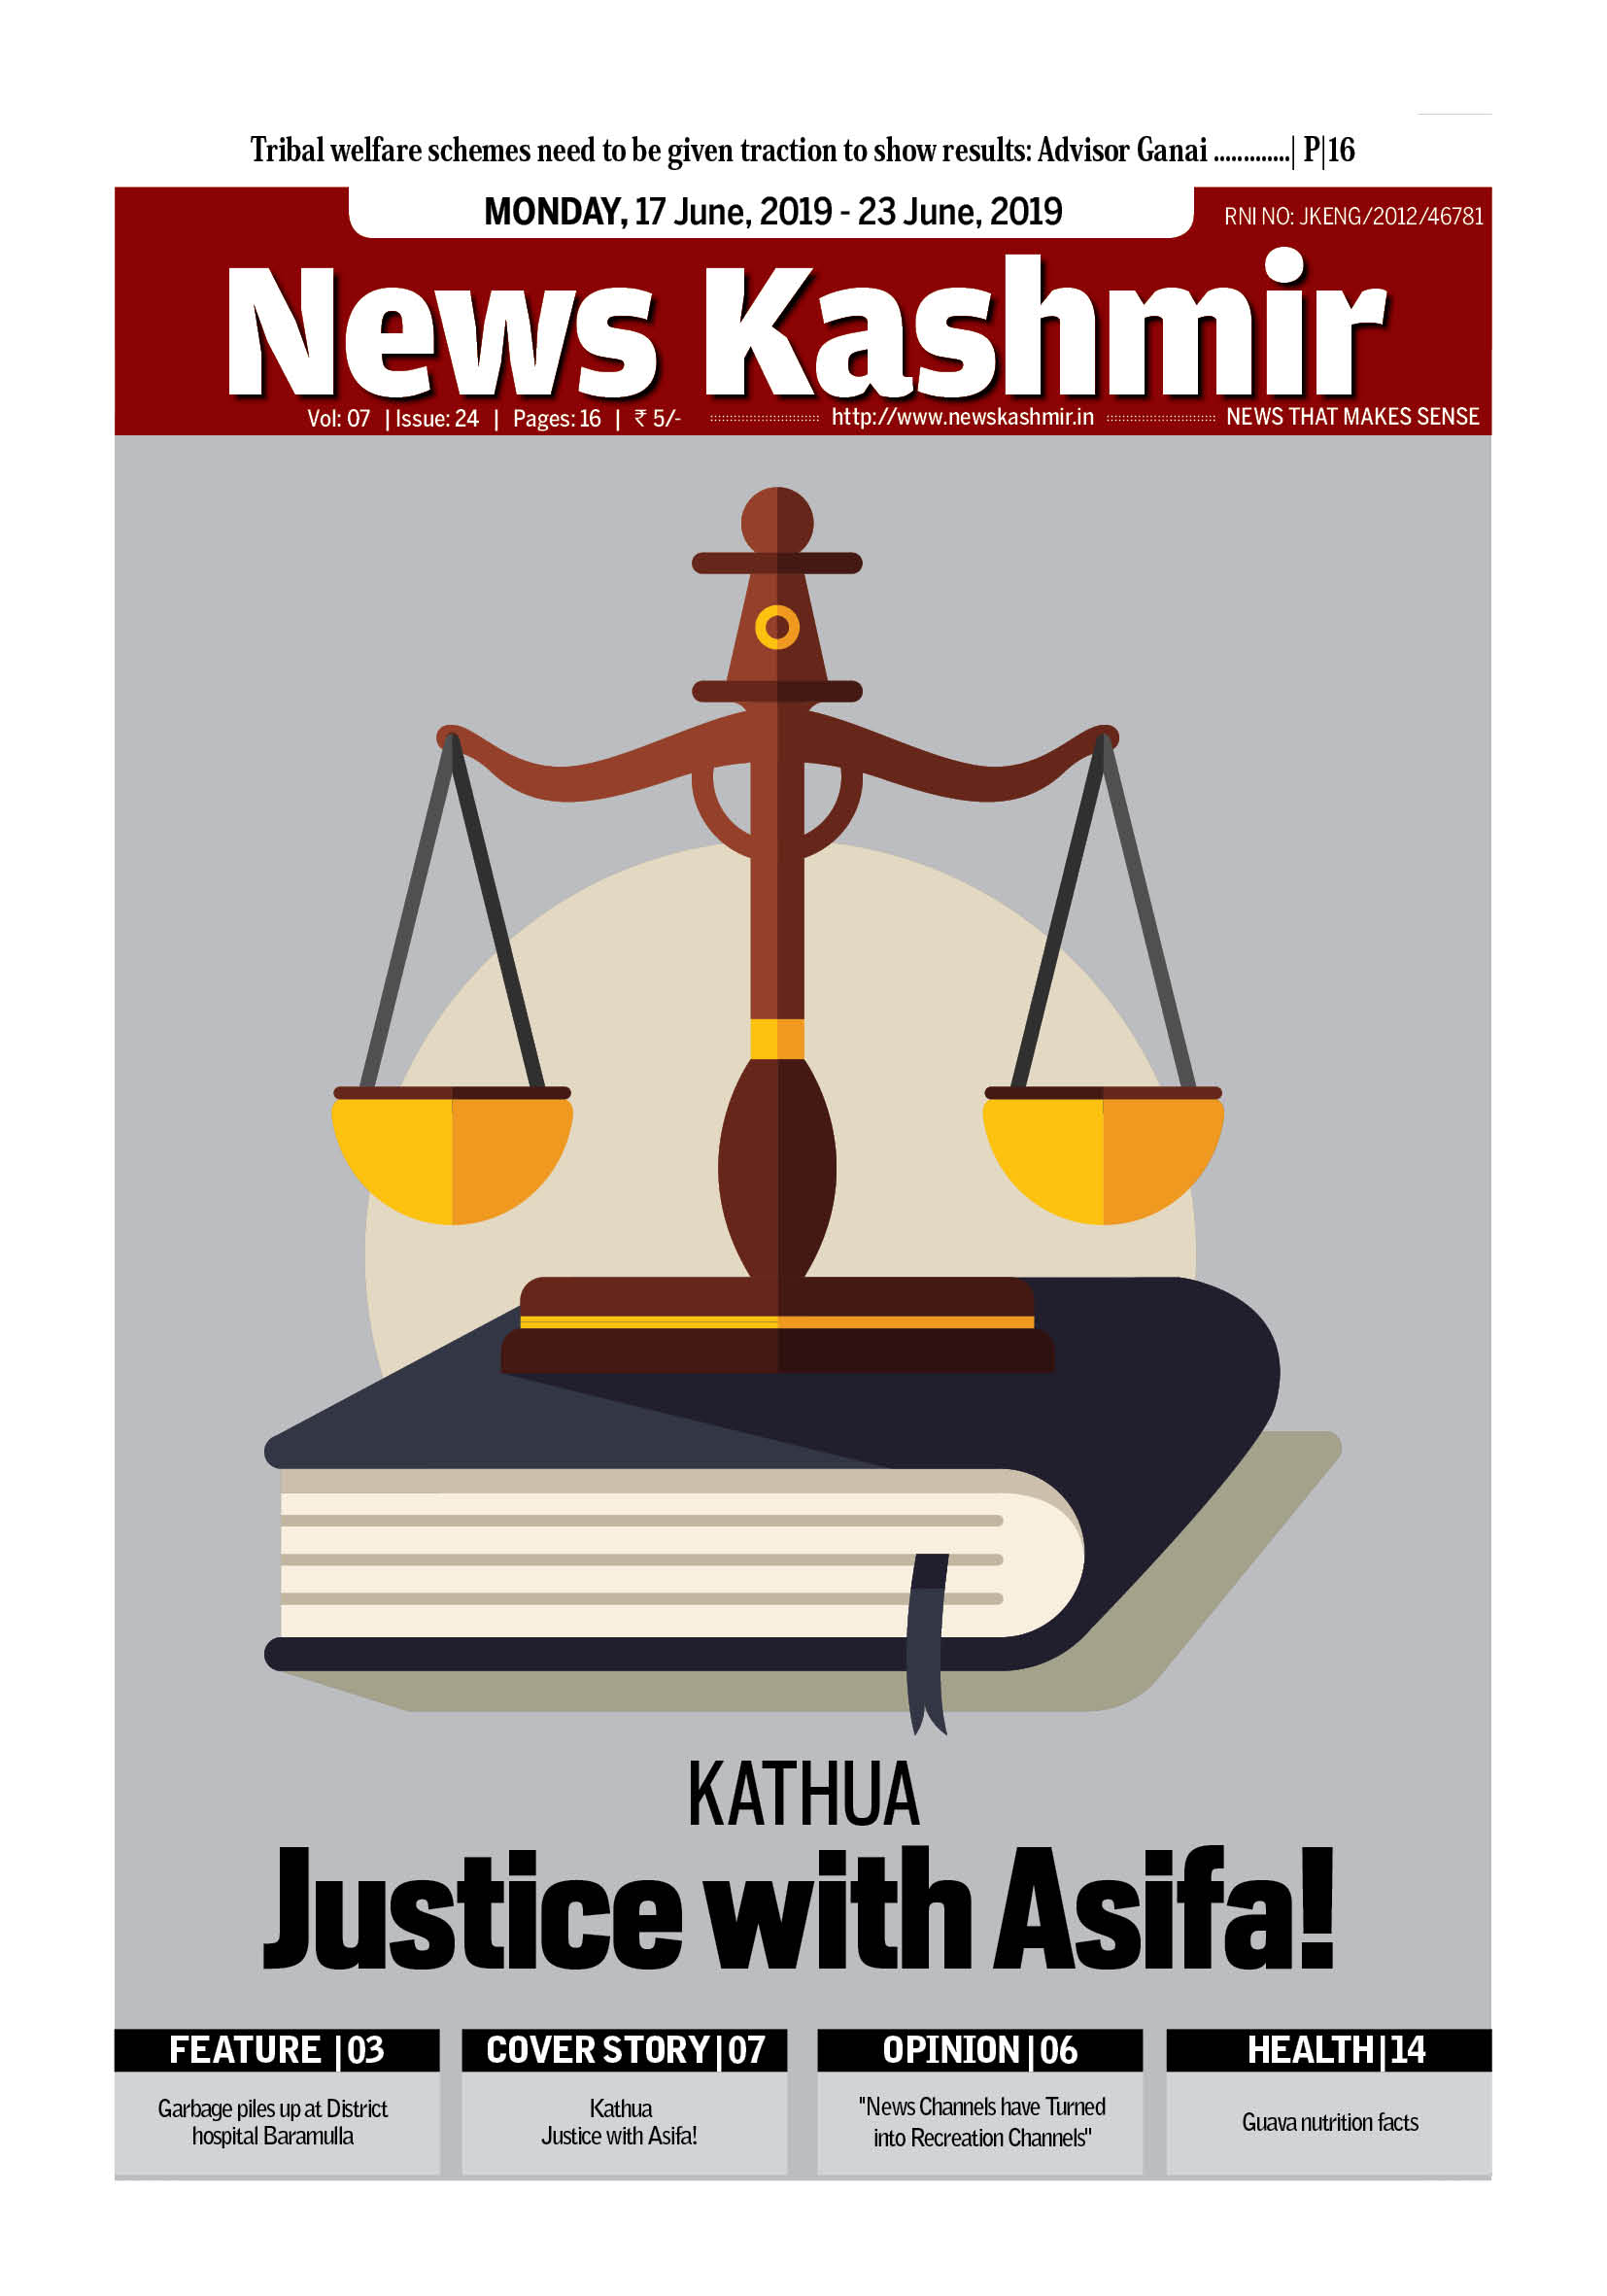 Kathua : Justice with Asifa!